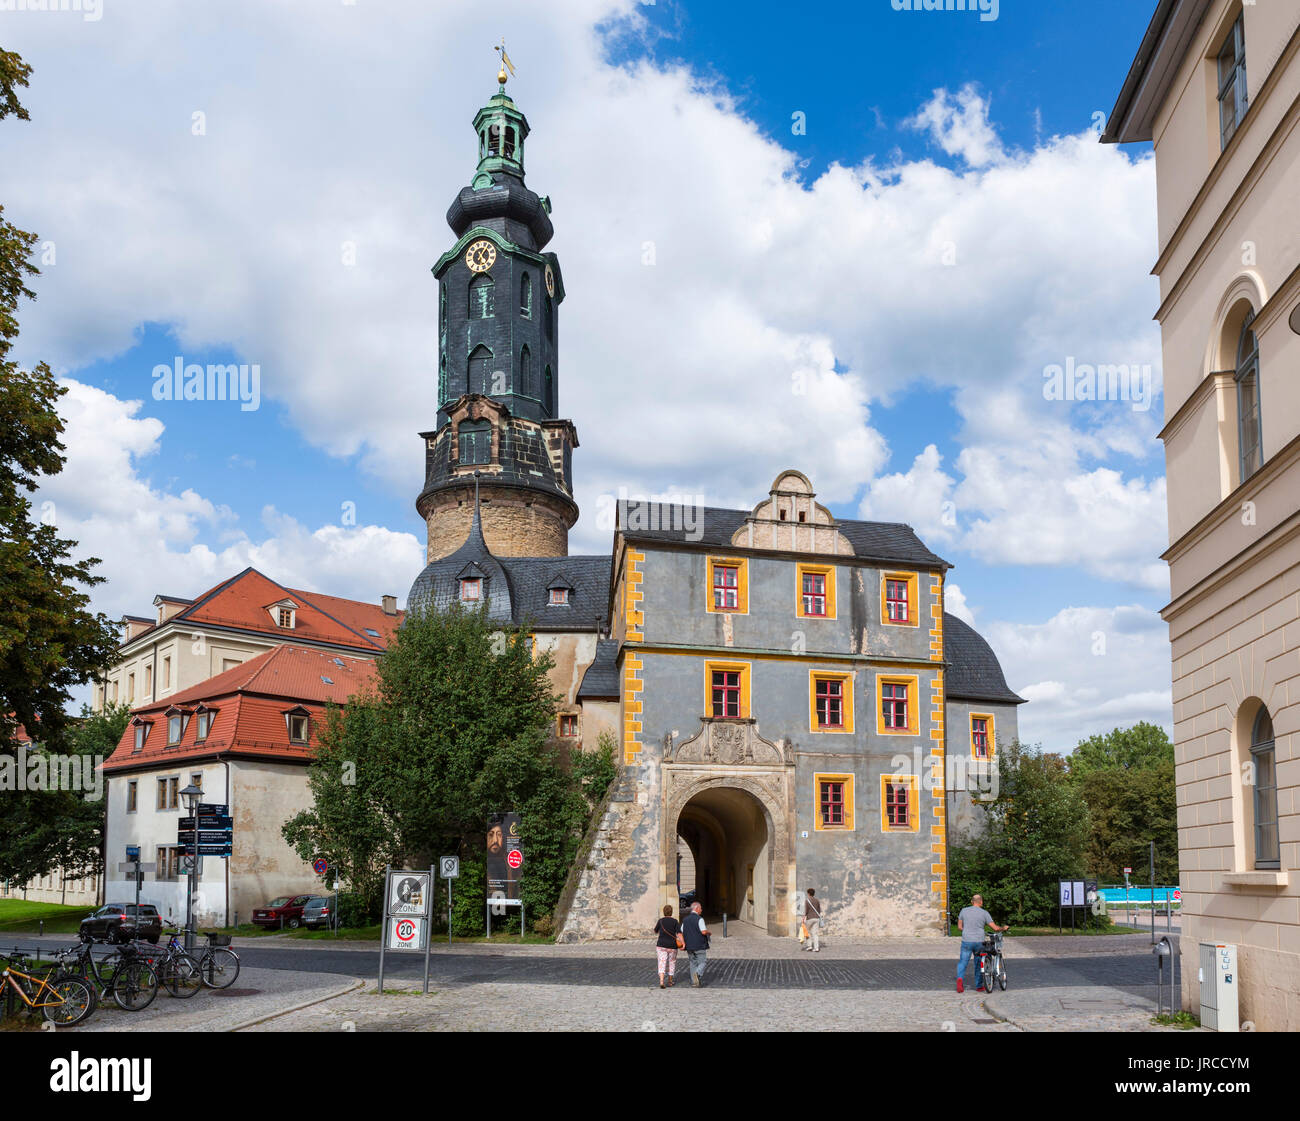 Tower and gateway to the Stadtschloss in the old town, Weimar, Thuringia, Germany Stock Photo